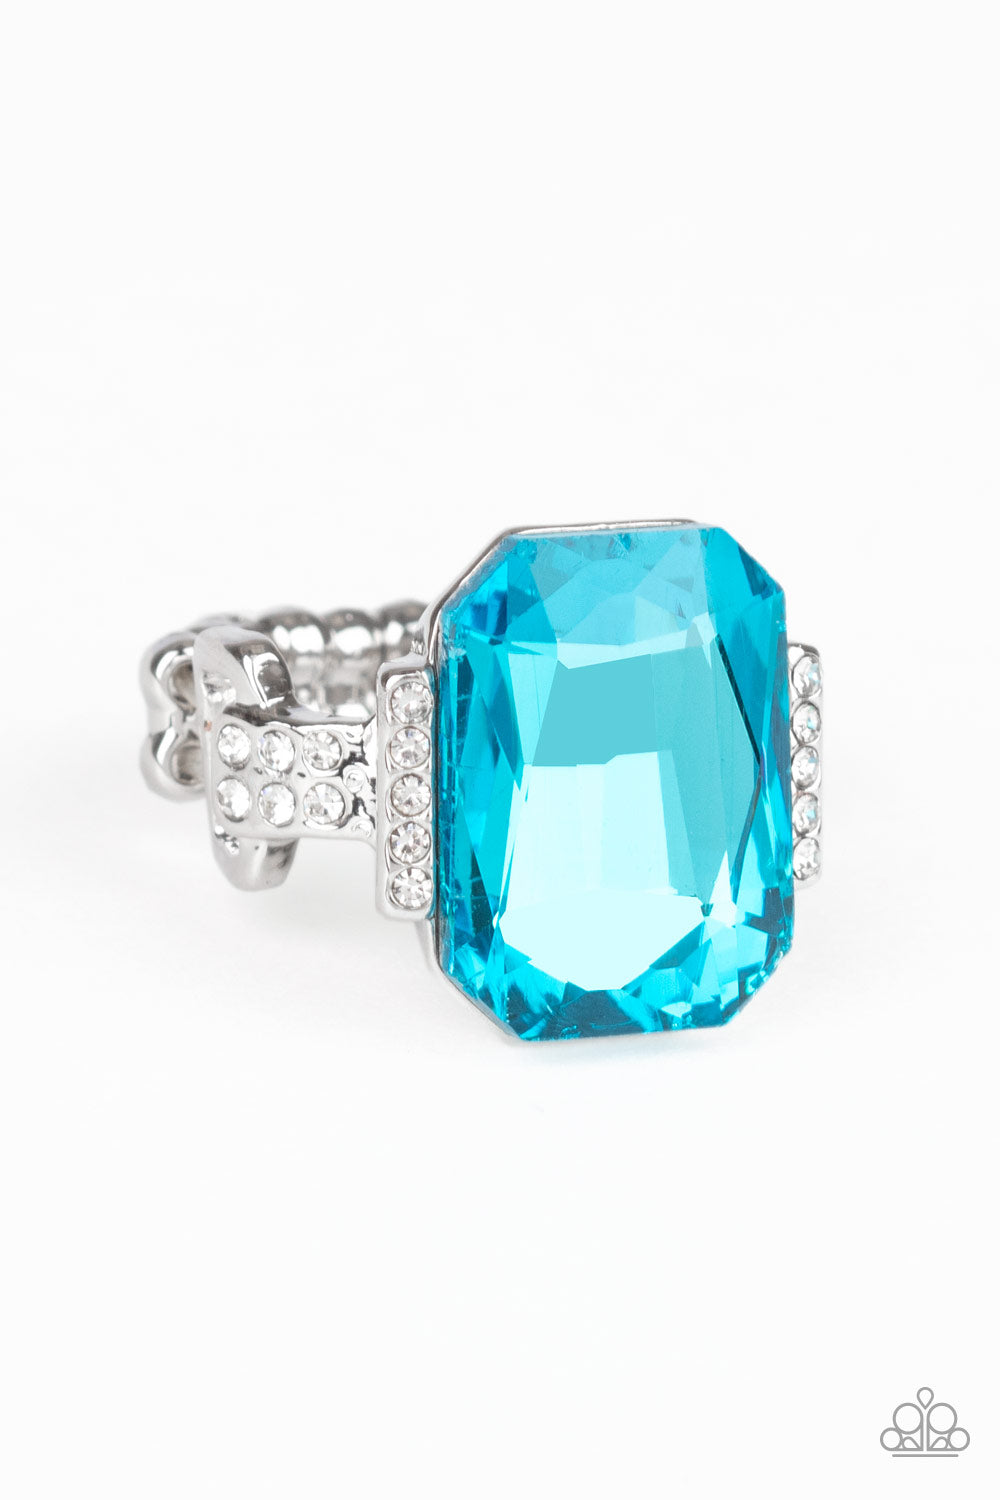 You Can COUNTESS On Me - blue - Paparazzi ring